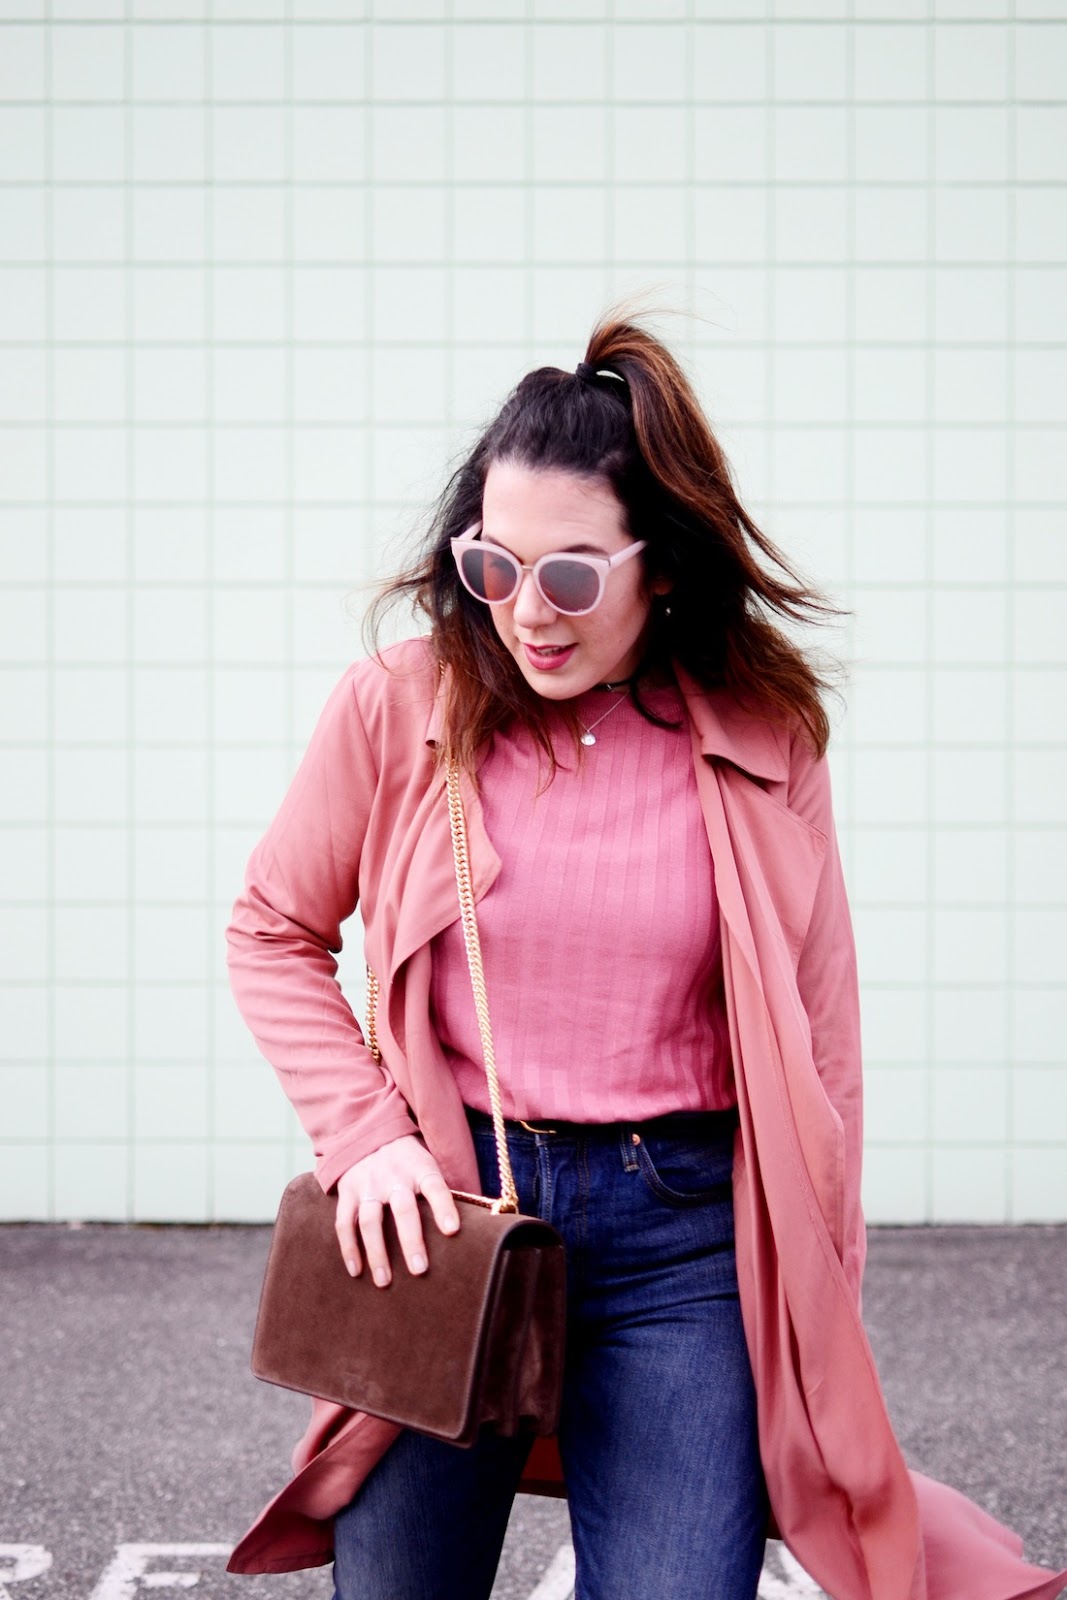 Rose duster jacket forever 21 outfit vancouver fashion blogger AGNEEL sophie bag brown suede